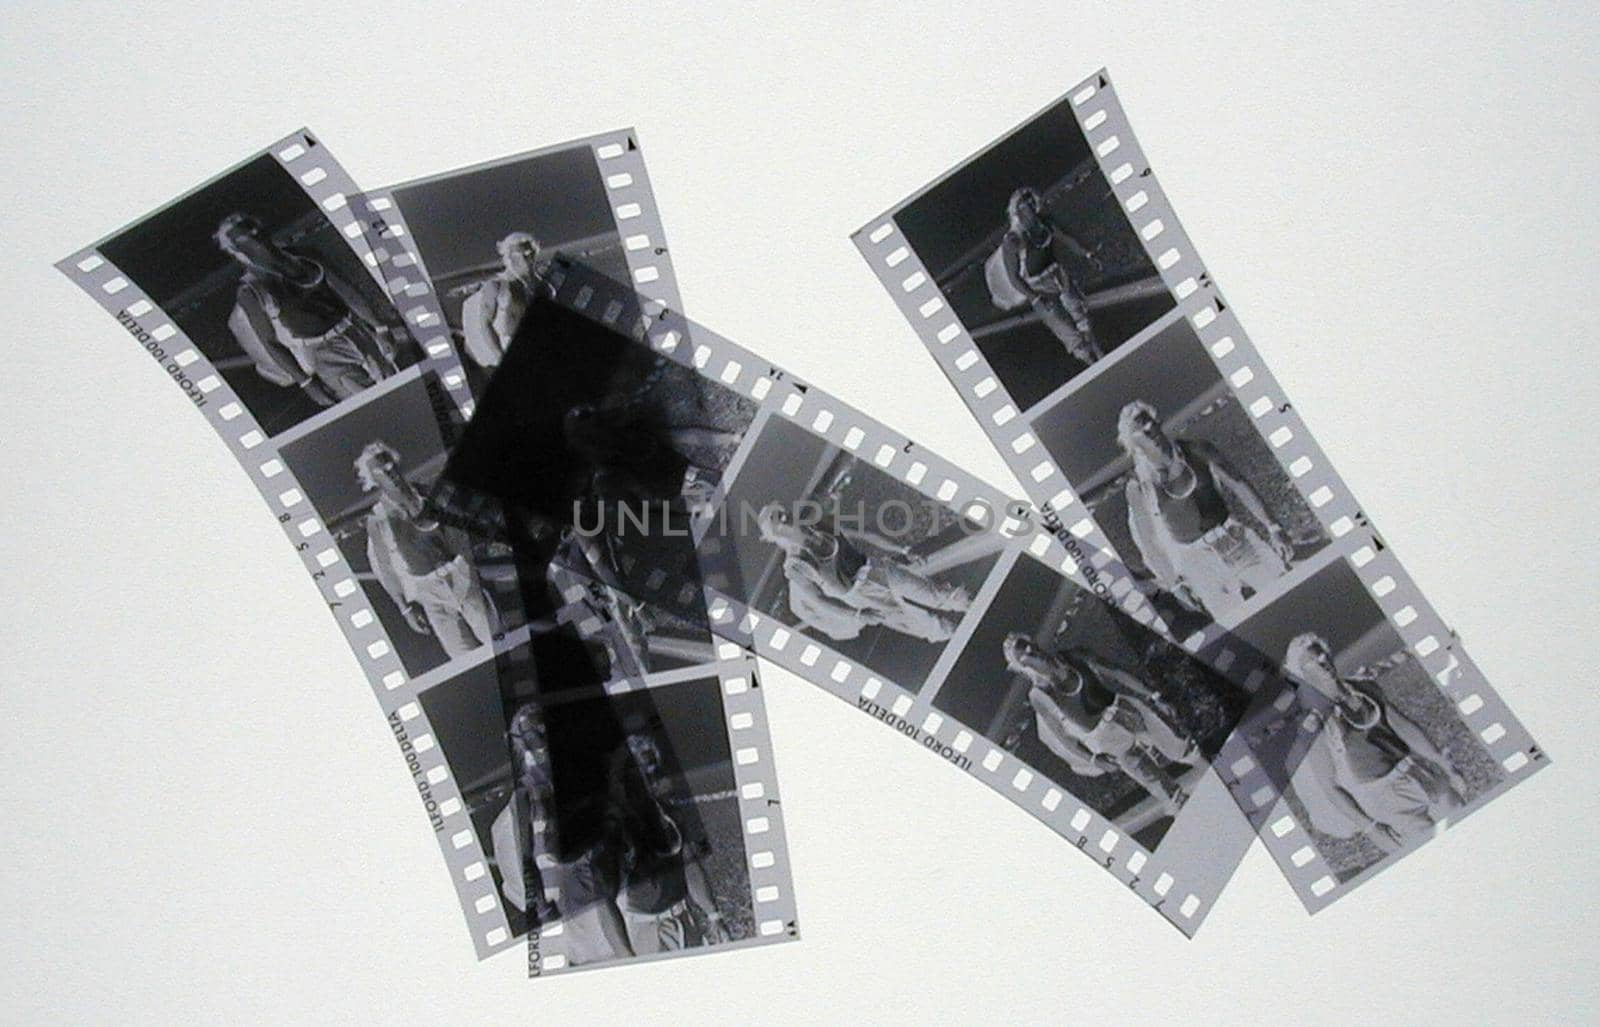 Four strips of negatives cut into three sections over gray background or light table